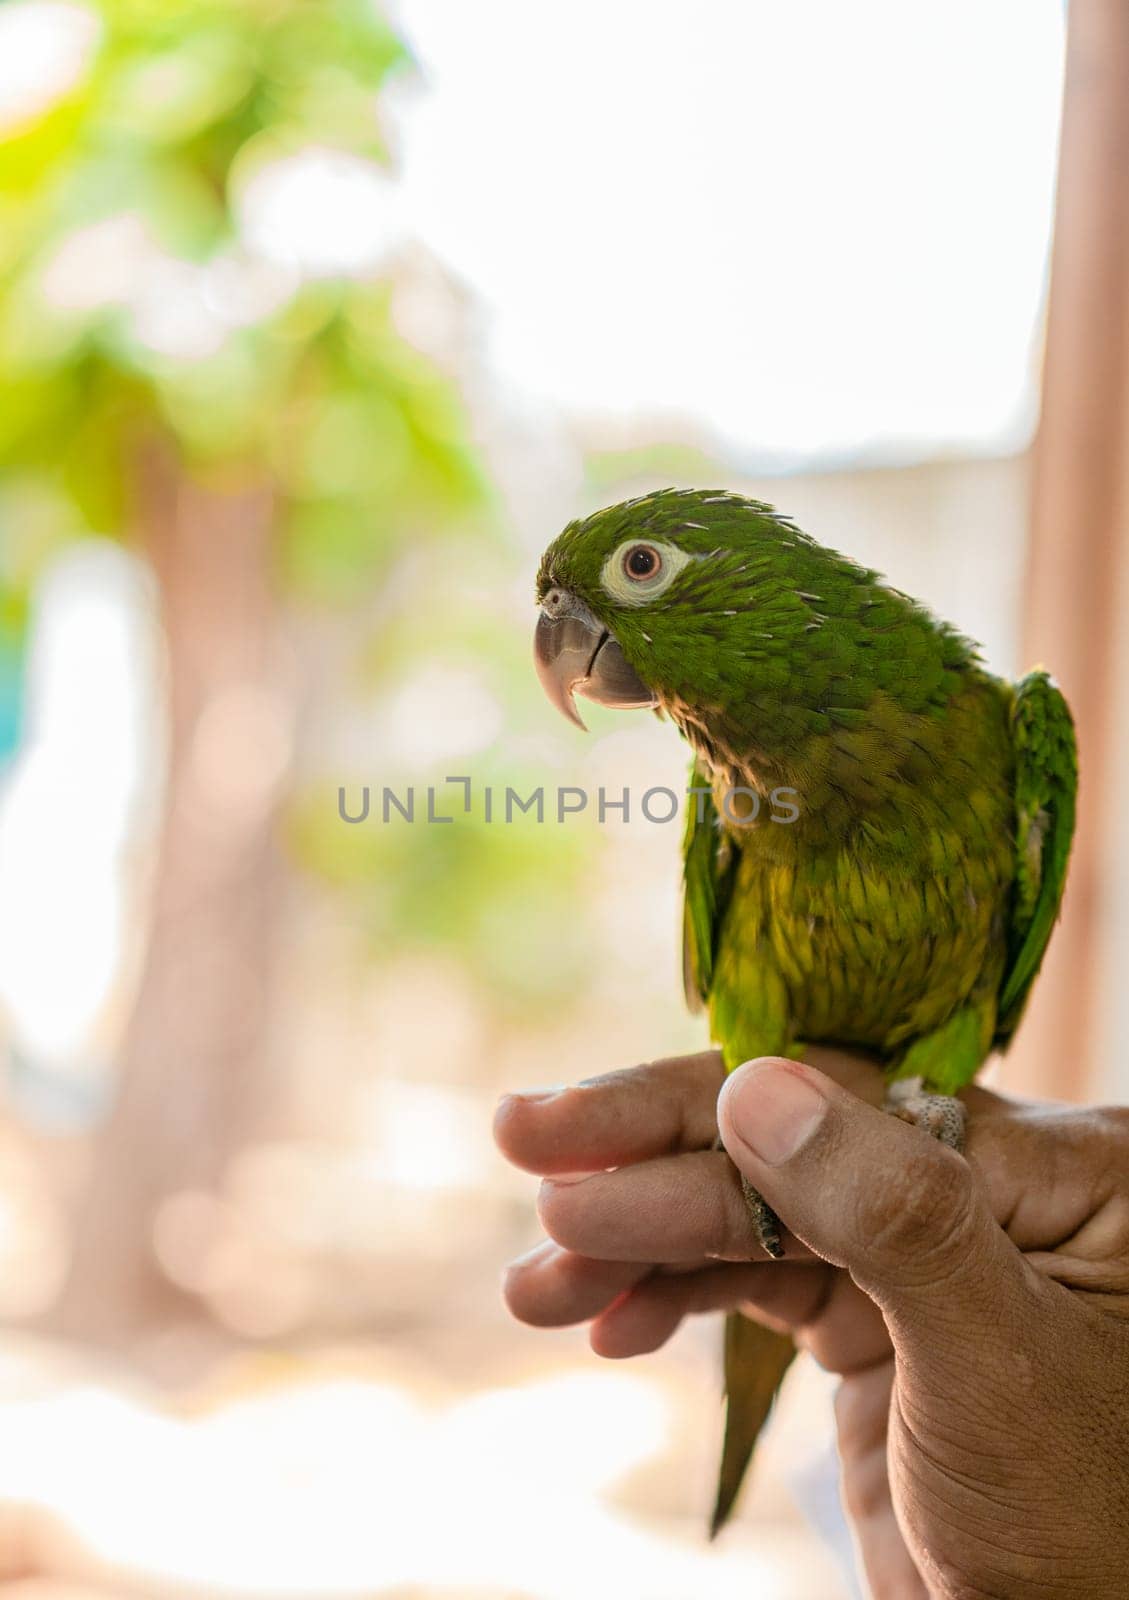 Melopsittacus undulatus or also known as the common green parakeet, posing. Hand holding a small parakeet and looking at camera